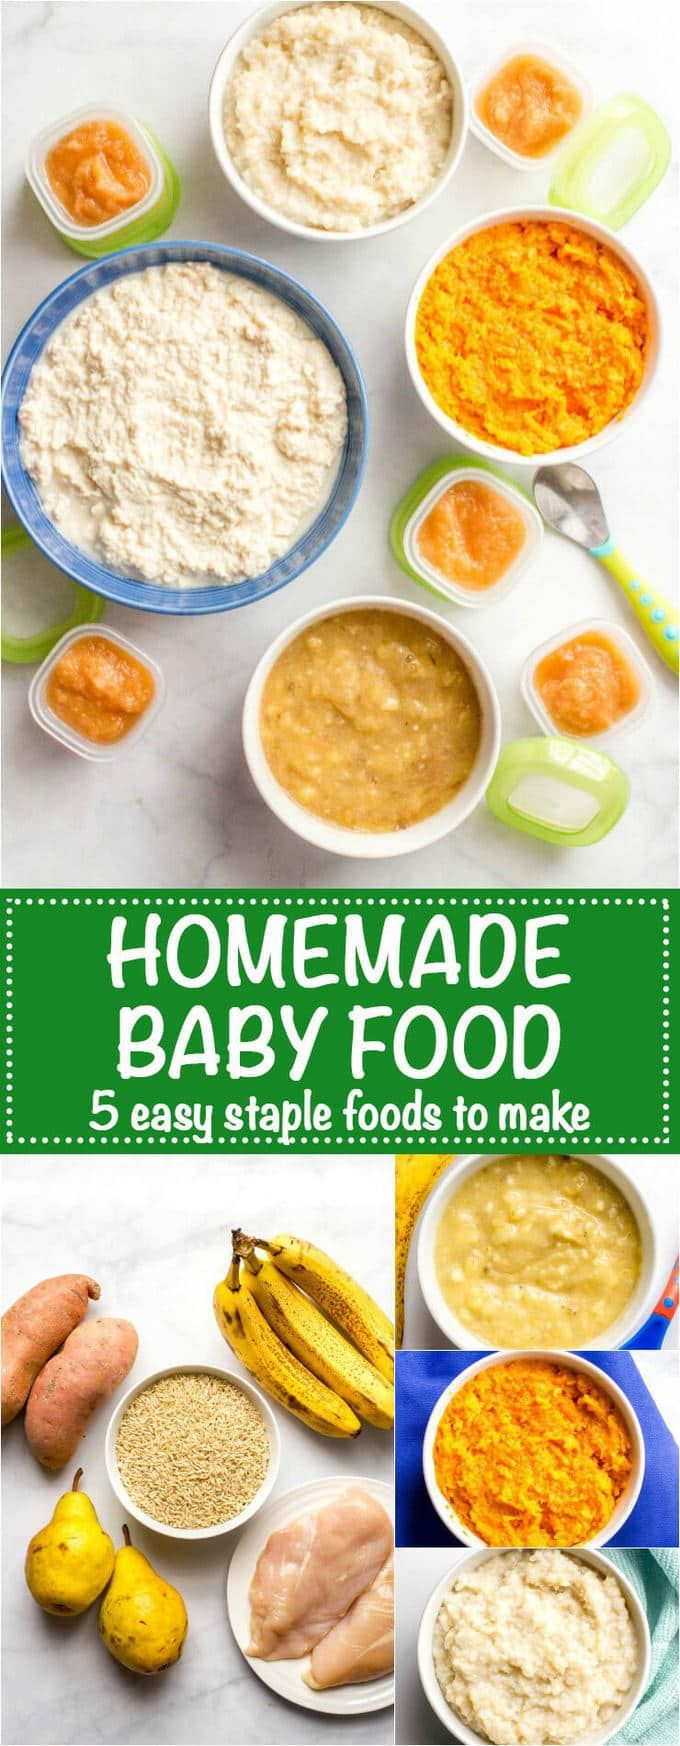 Recipes Using Baby Food Meat
 Homemade baby food Sweet potatoes brown rice chicken